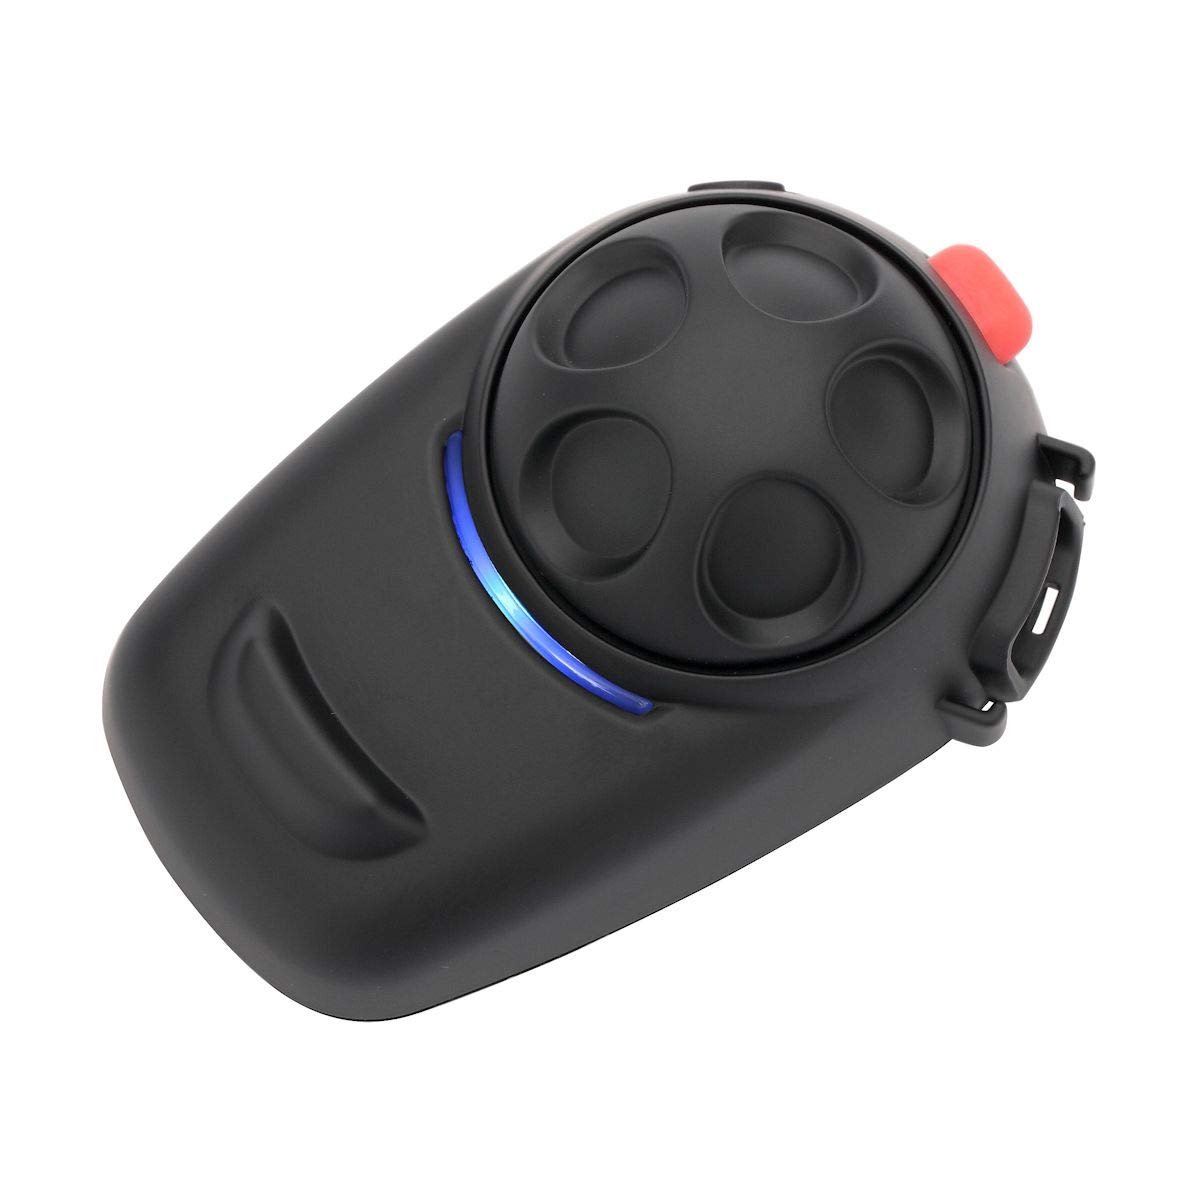 Sena (SMH5-UNIV) Bluetooth Headset and Intercom for Scooters/Motorcycles with Universal Microphone Kit